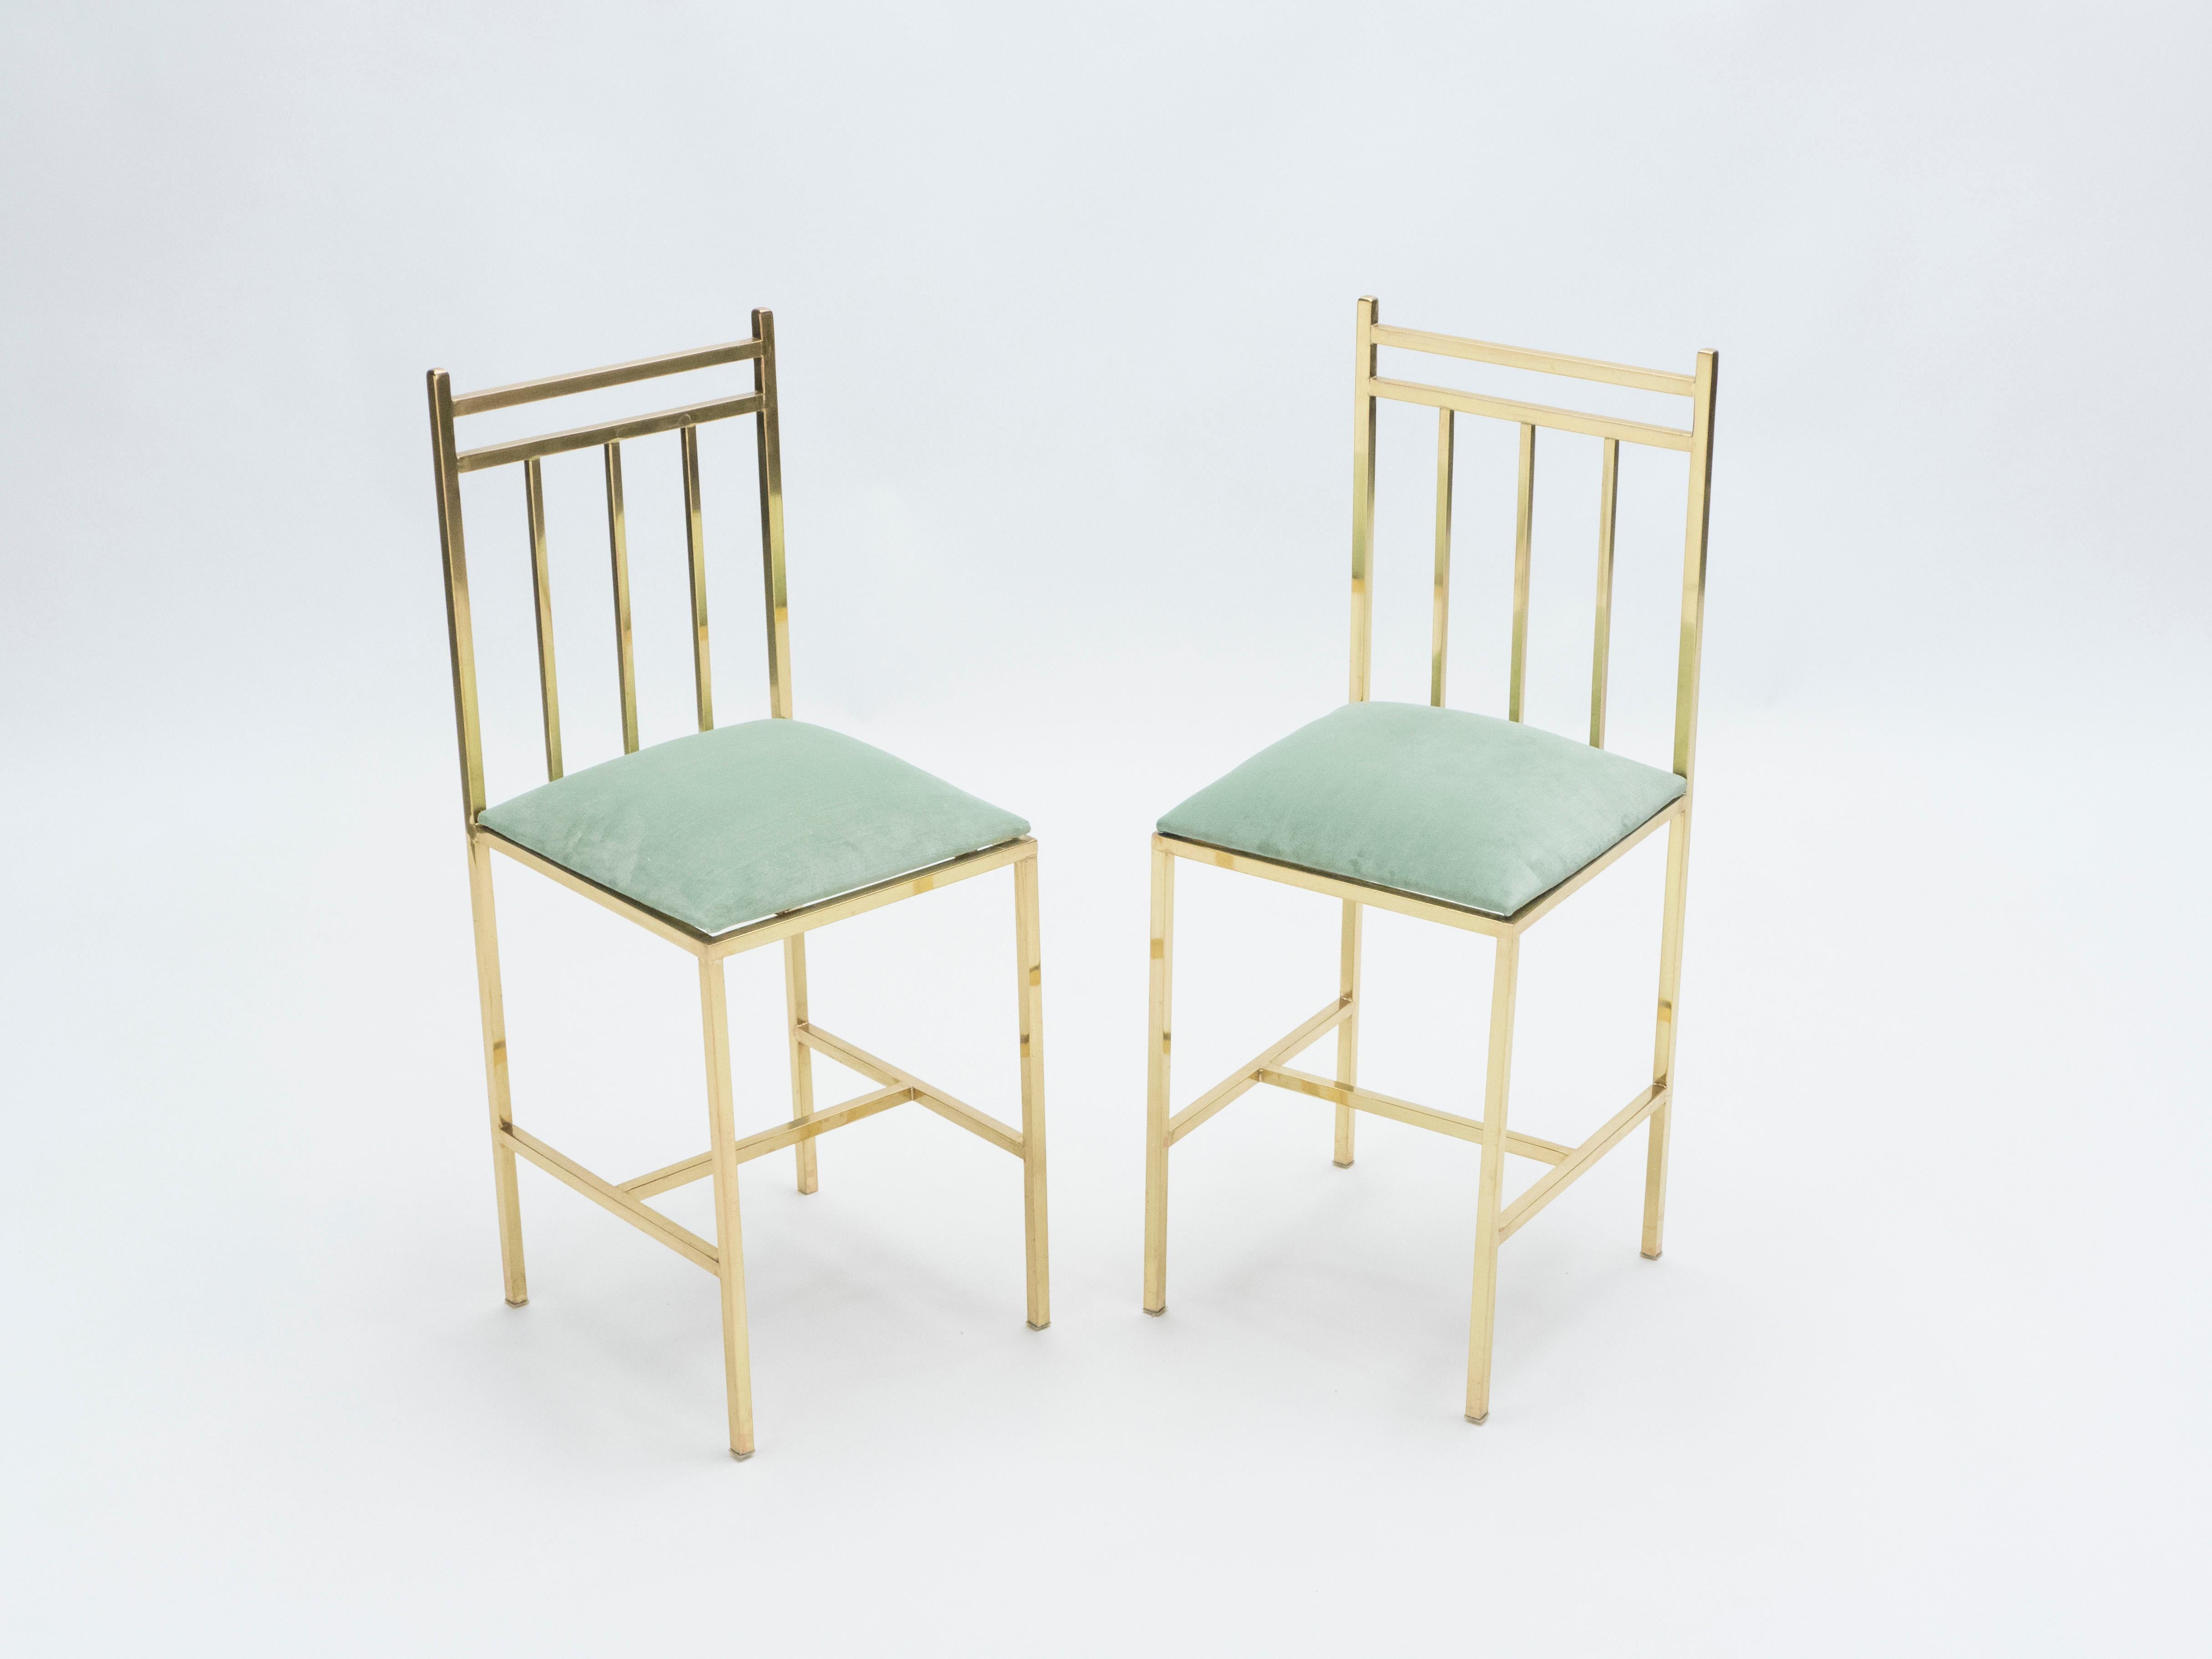 Rare and cool kid’s brass chairs attributed to Marc Du Plantier and made in the early 1960s. Beautiful geometric brass design towers to newly upholstered water green velvet seats by Nobilis, reference Calder. The bright brass and rich fabric